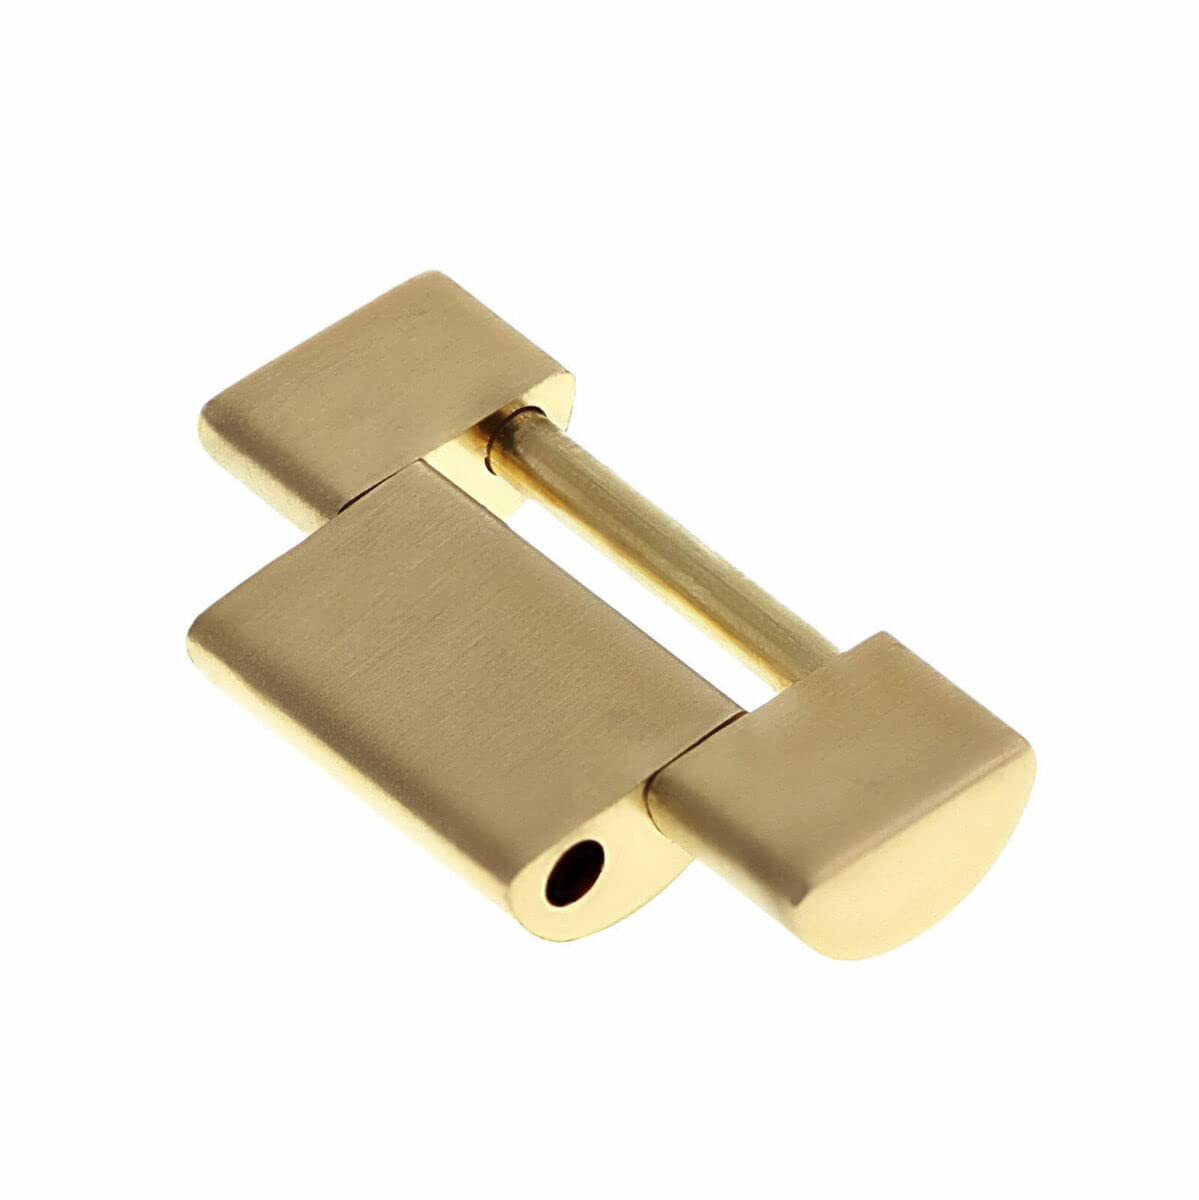 Ewatchparts 17.30MM PRESIDENT WATCH PART LINK 18KY COMPATIBLE WITH ROLEX DD 41MM 218238, 218348, 218398